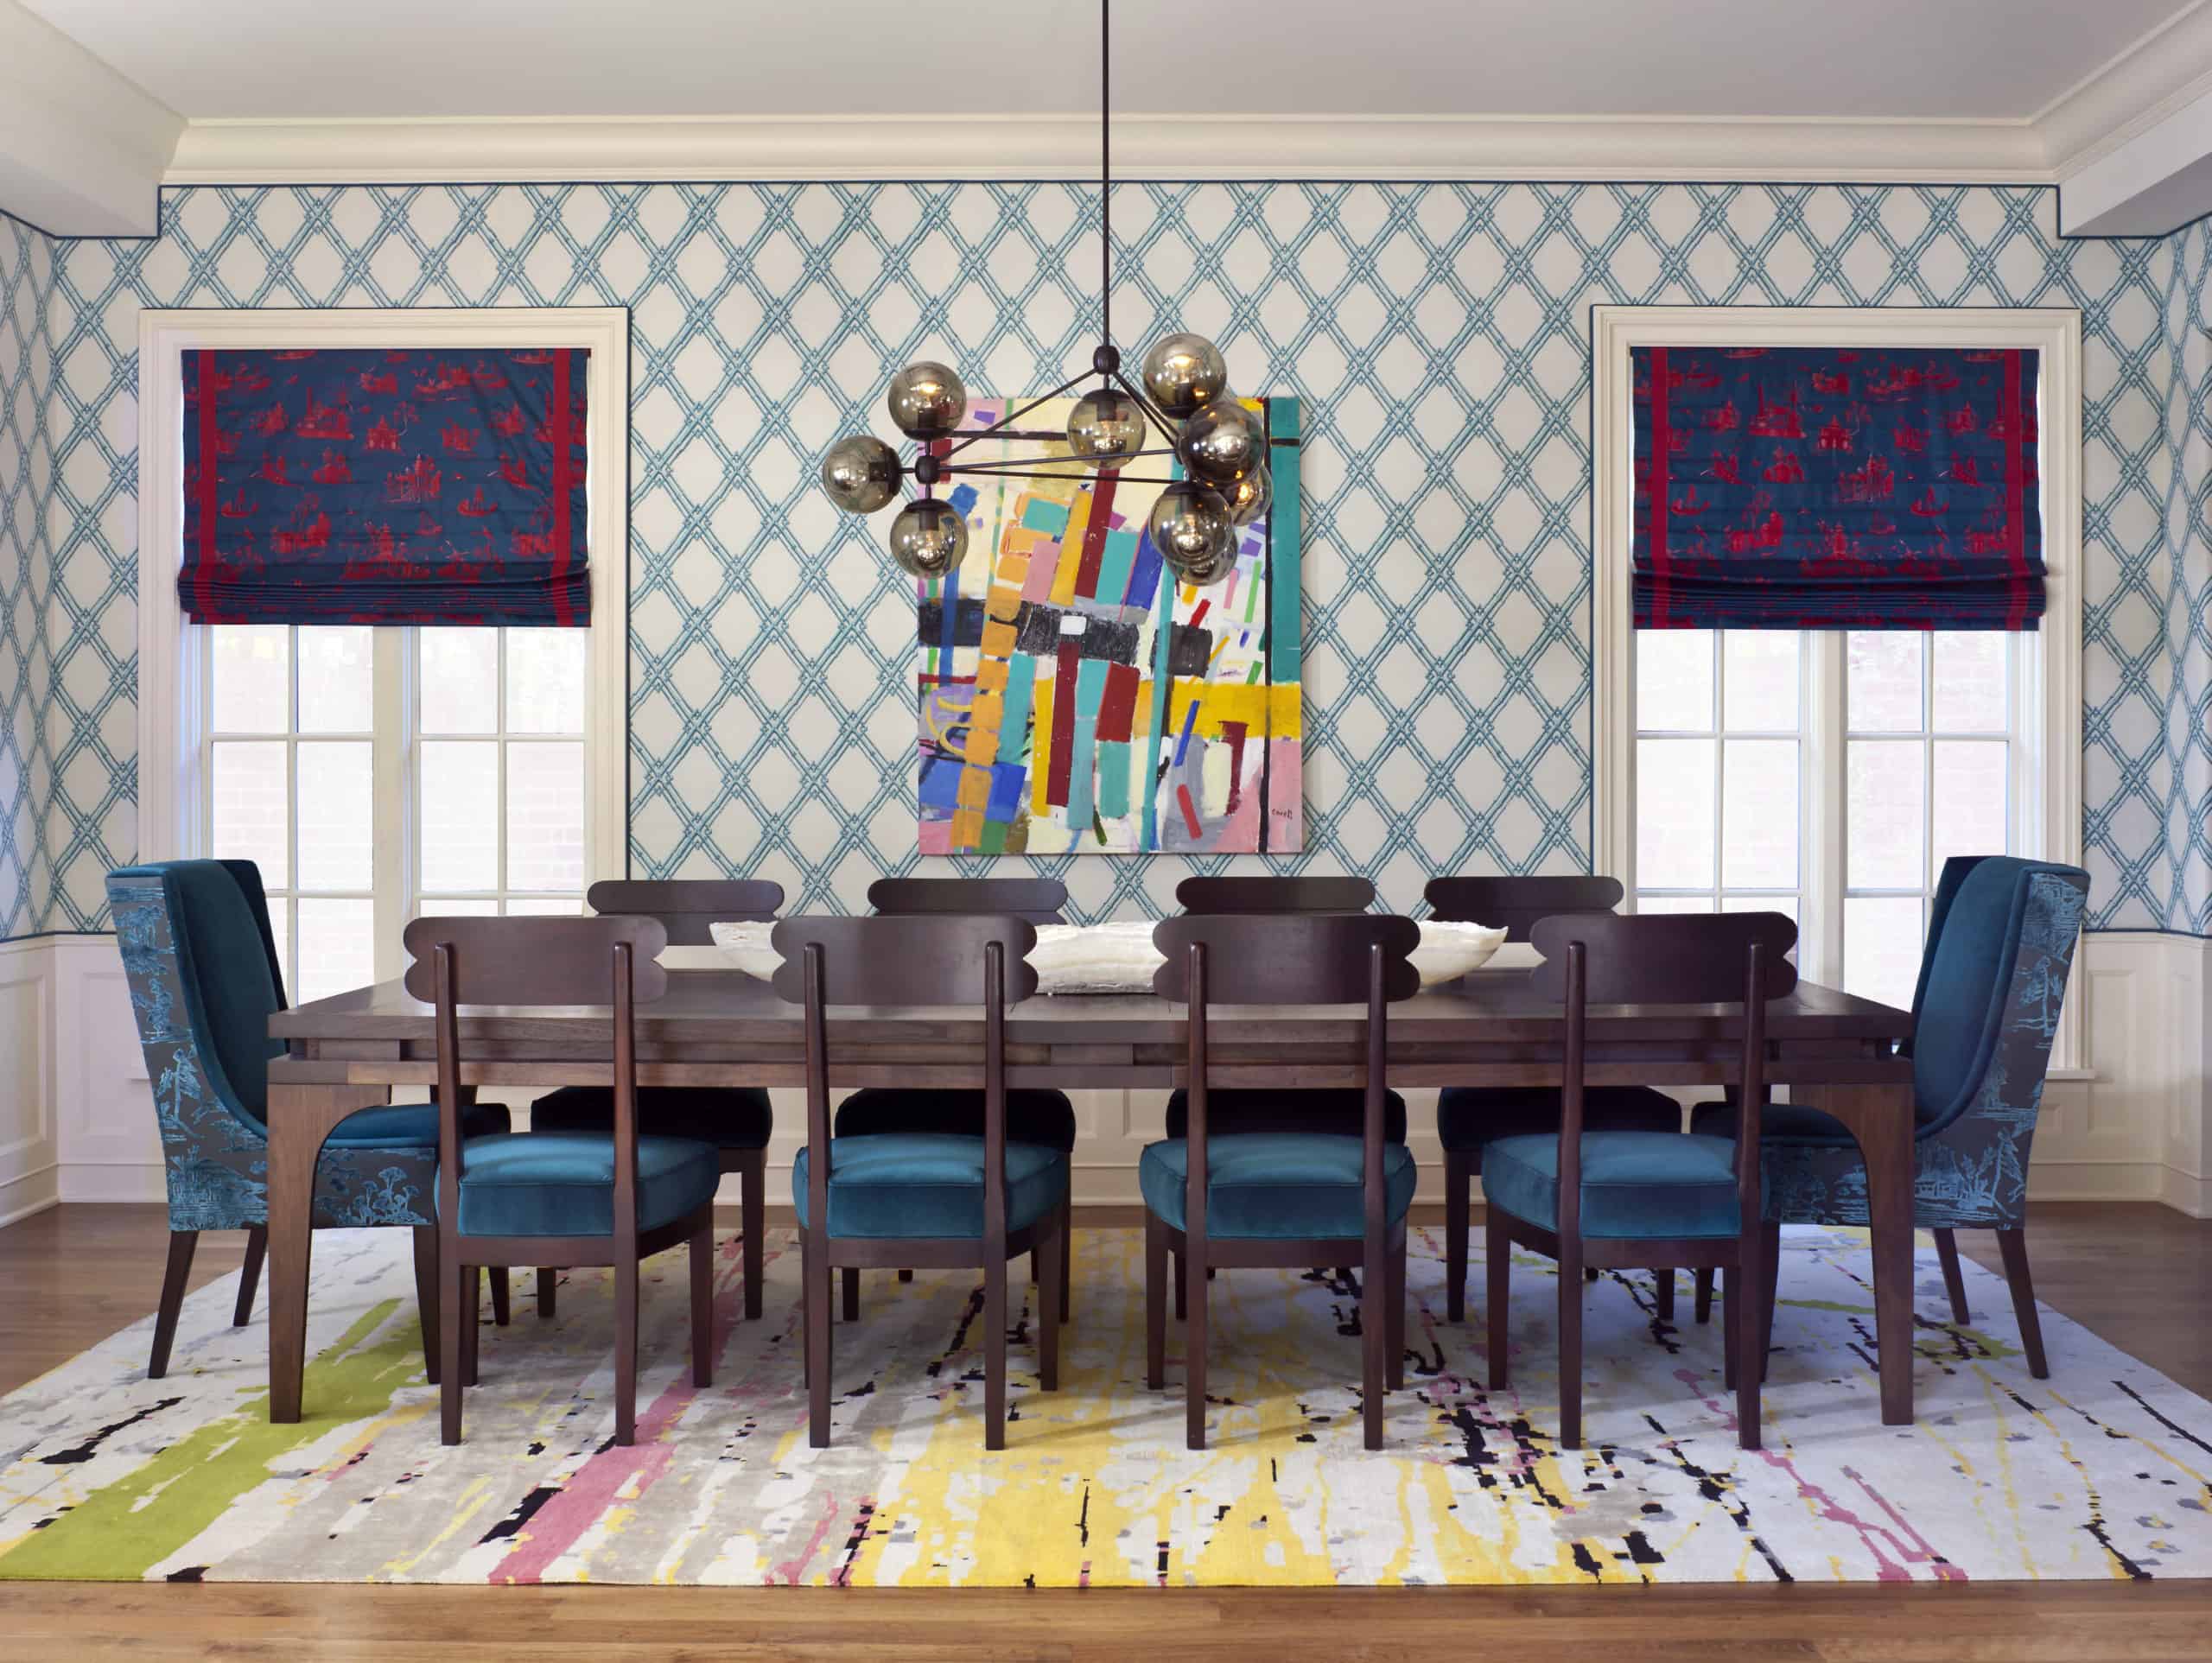 Colorful dining room decor in bright colors and artistic interior design style with paint splash rug